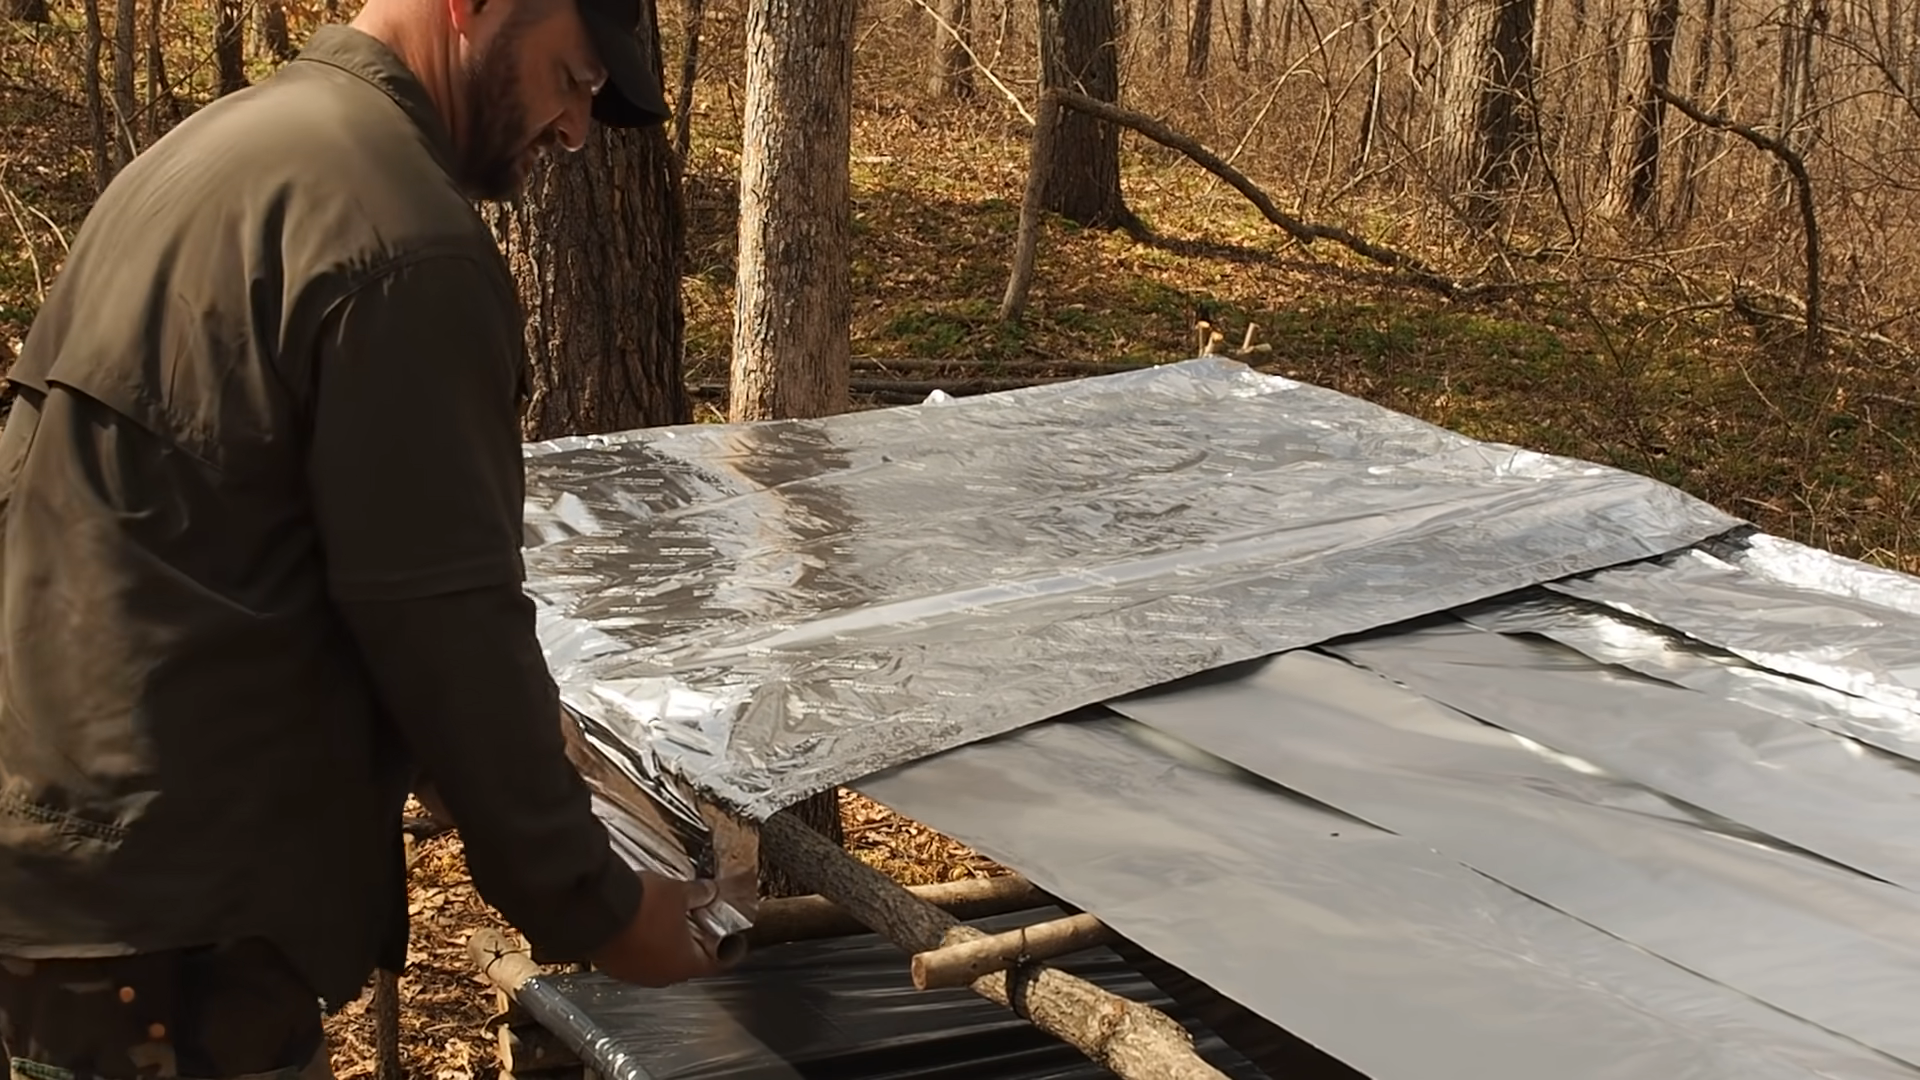 Benefits Of Using Foil Tent: